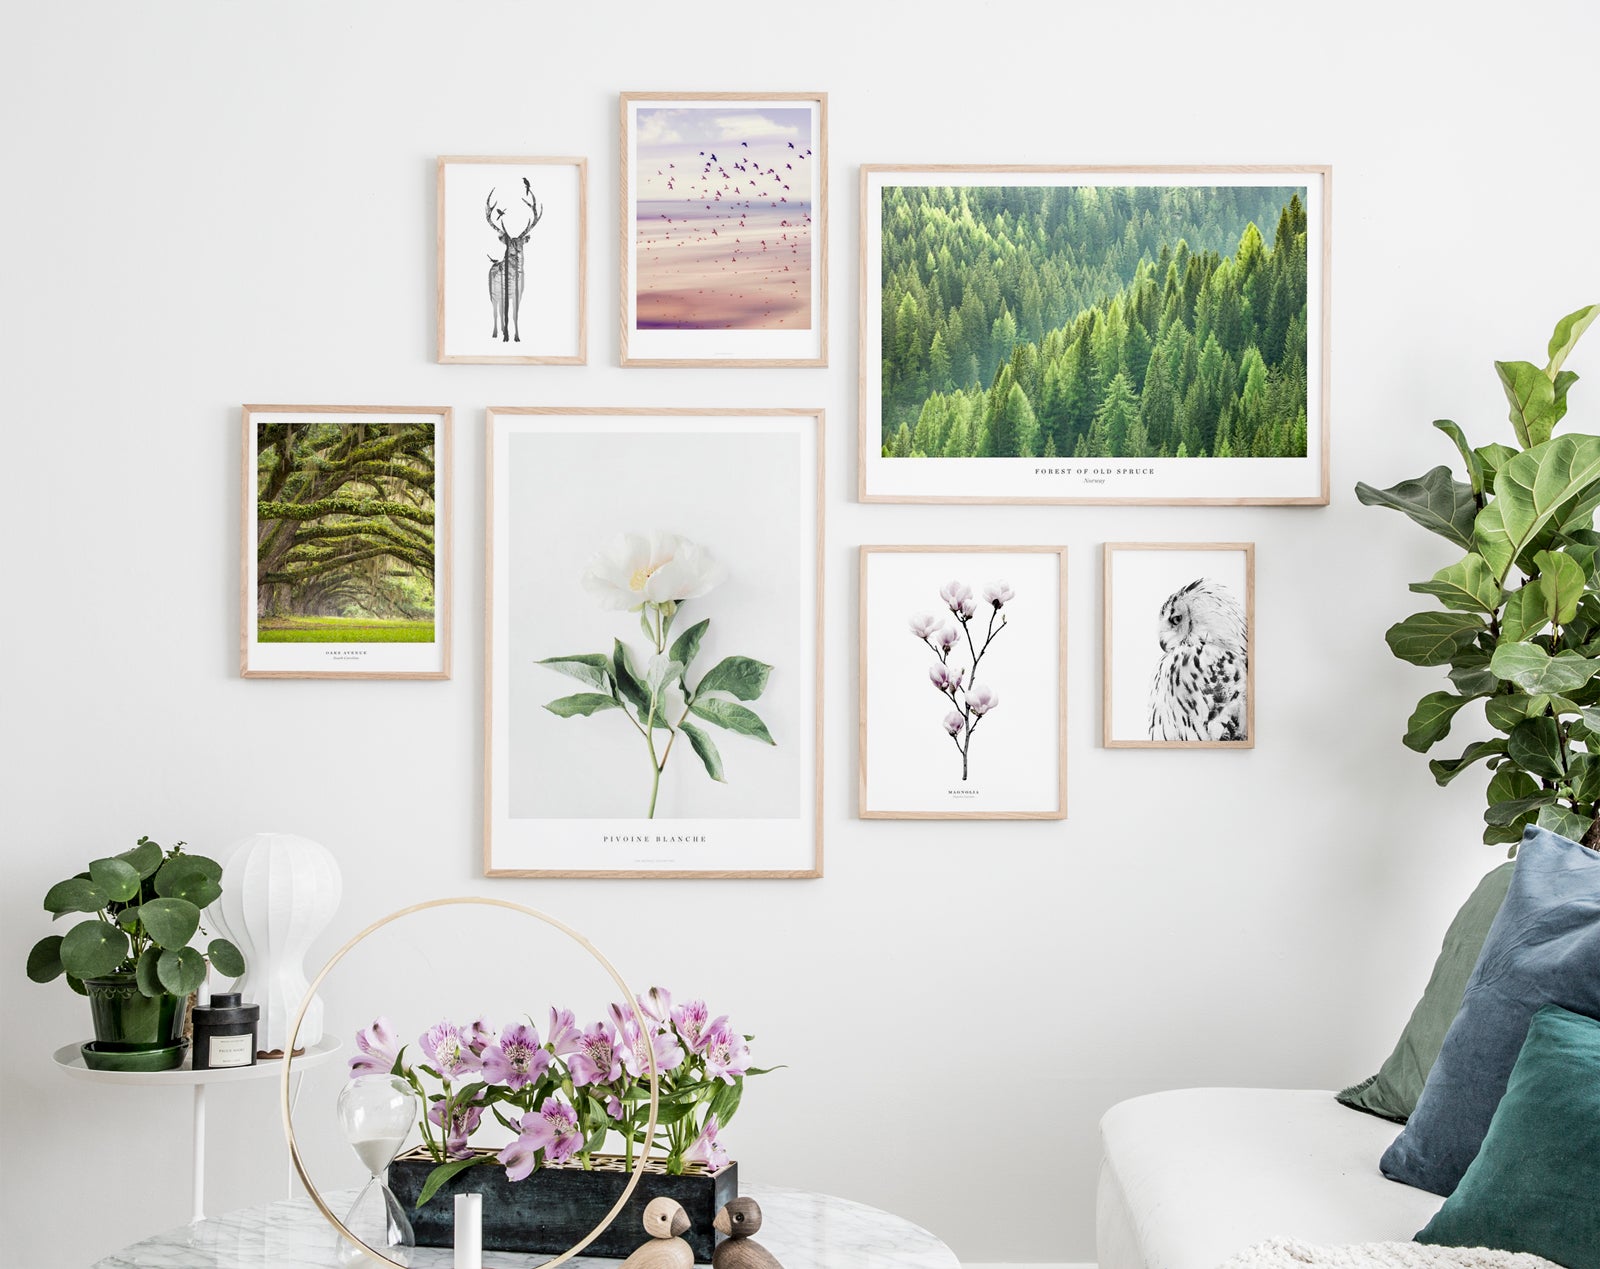 Beautiful gallery wall with nature inspired posters in oak frames